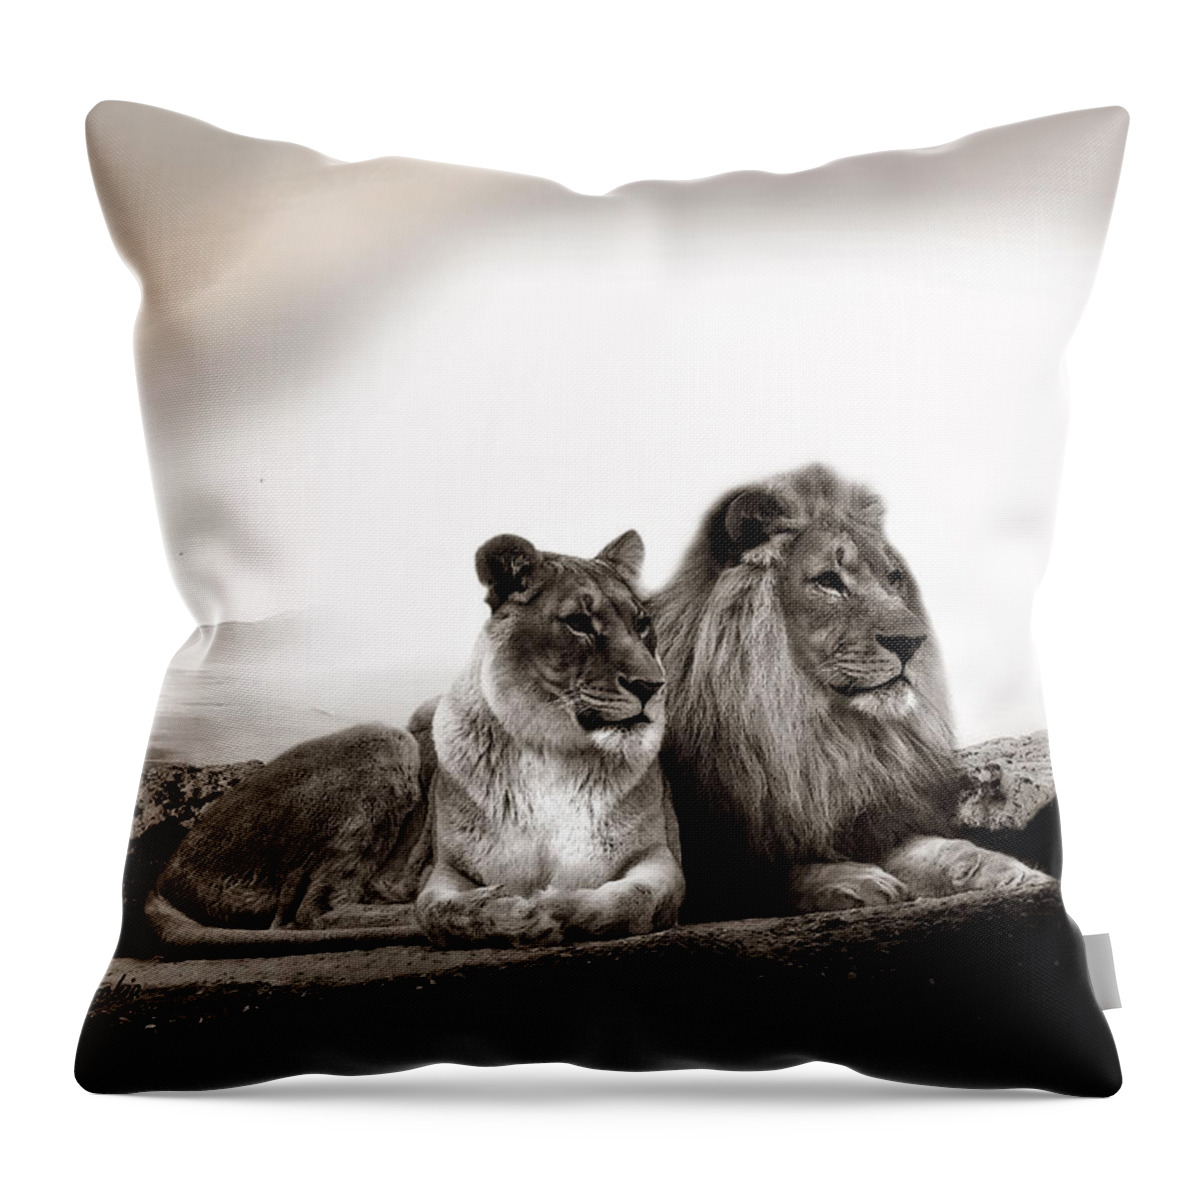 Lions Throw Pillow featuring the photograph Lion Couple In Sunset by Christine Sponchia